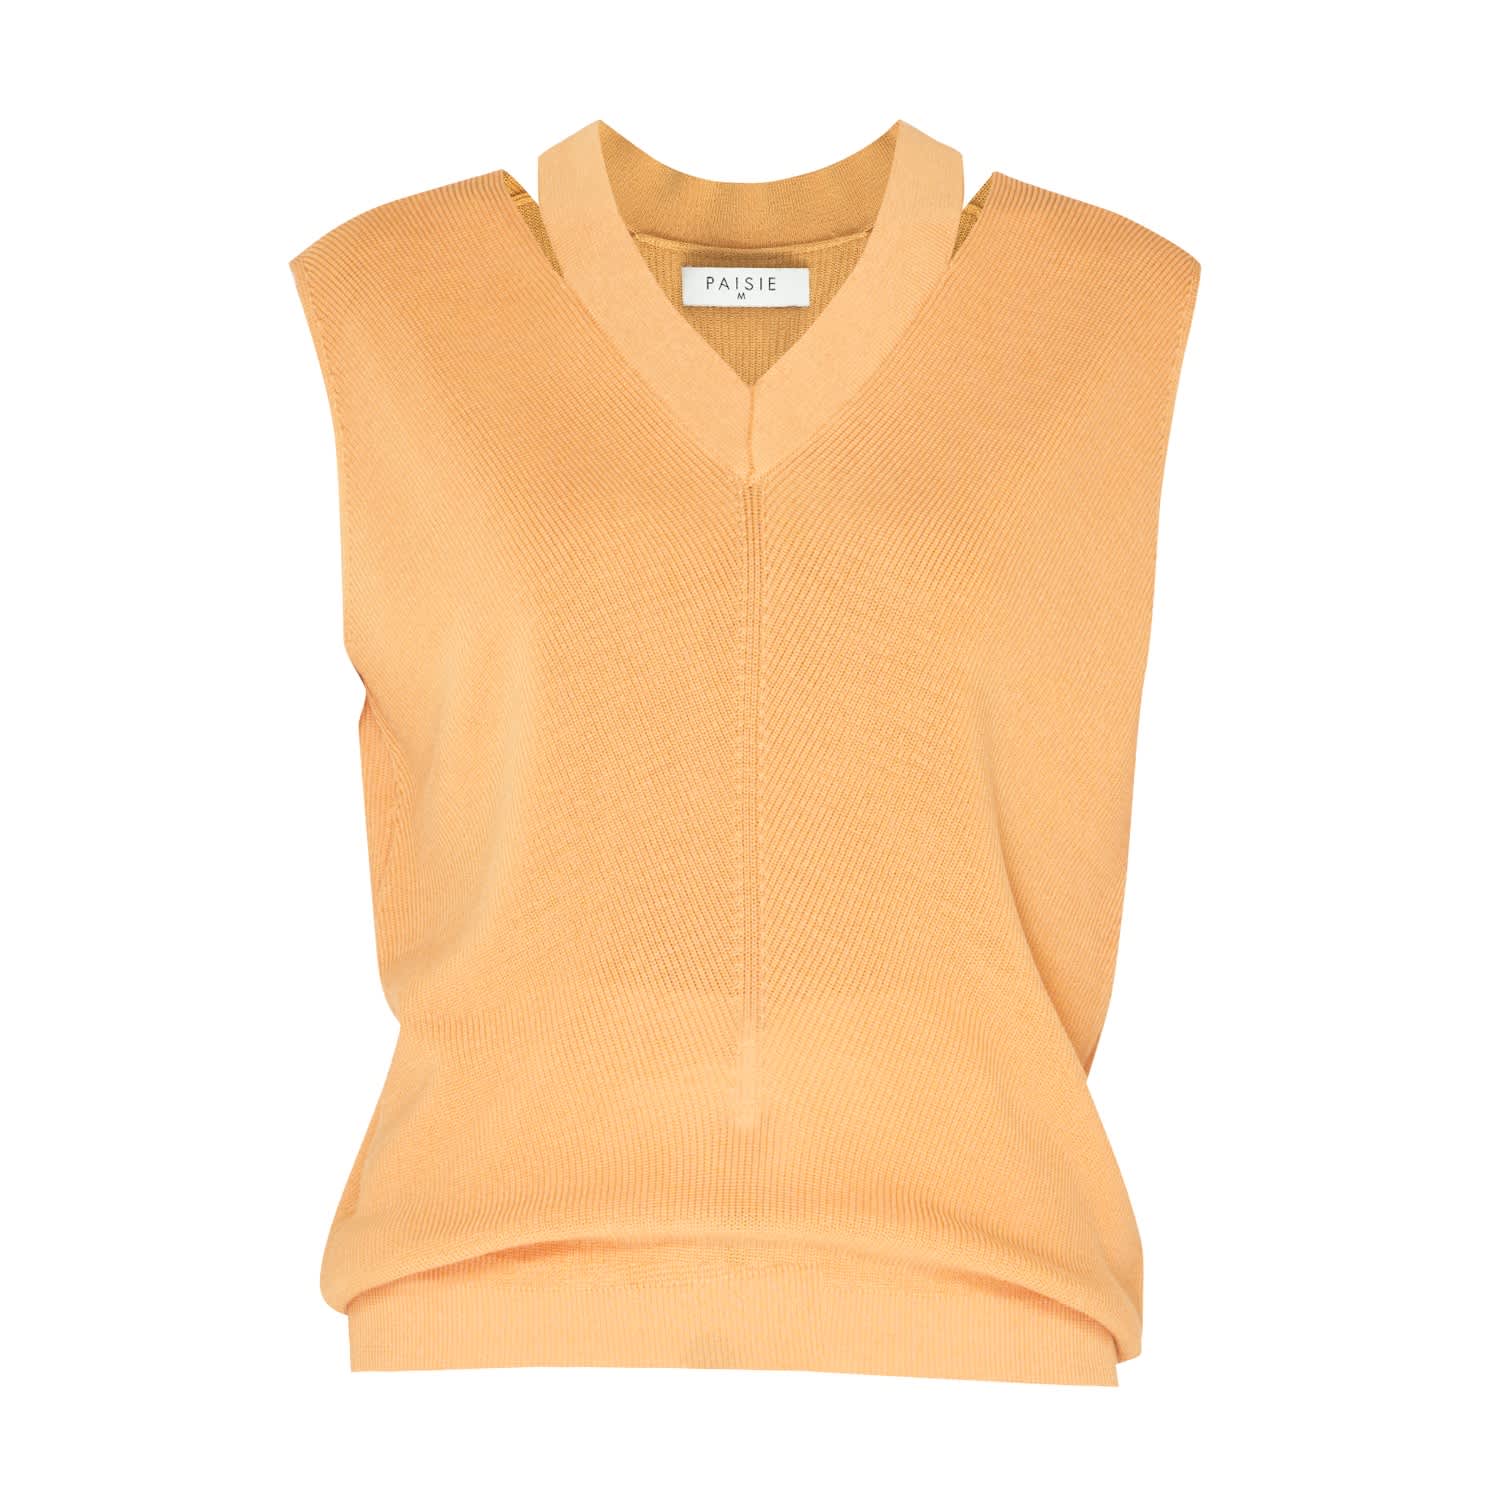 Paisie V-Neck Sleeveless Top With Cut Out Neck in Orange